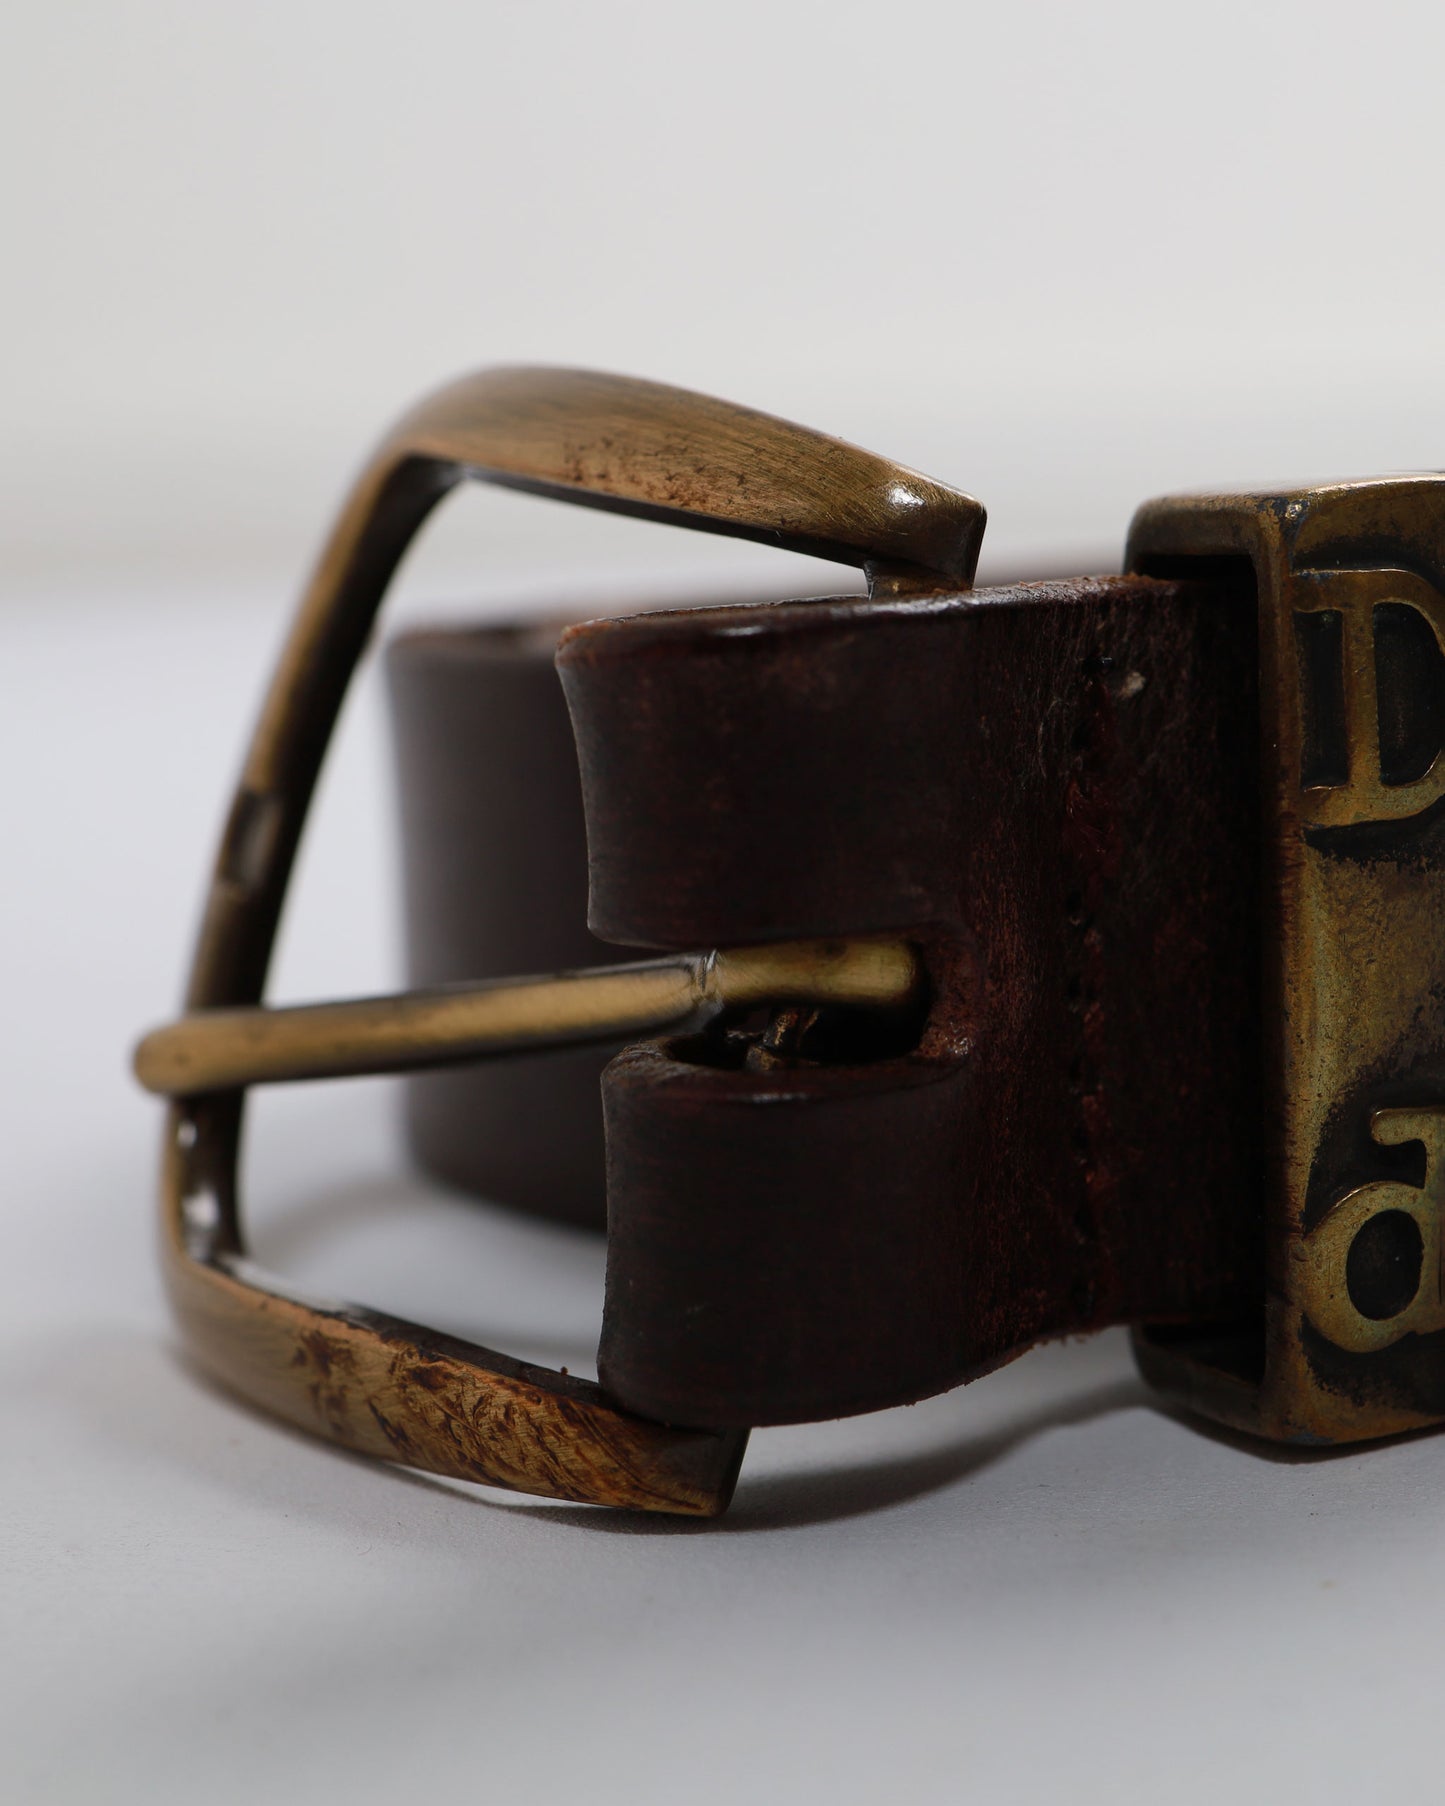 Diesel leather belt with metal buckle and Diesel double logo